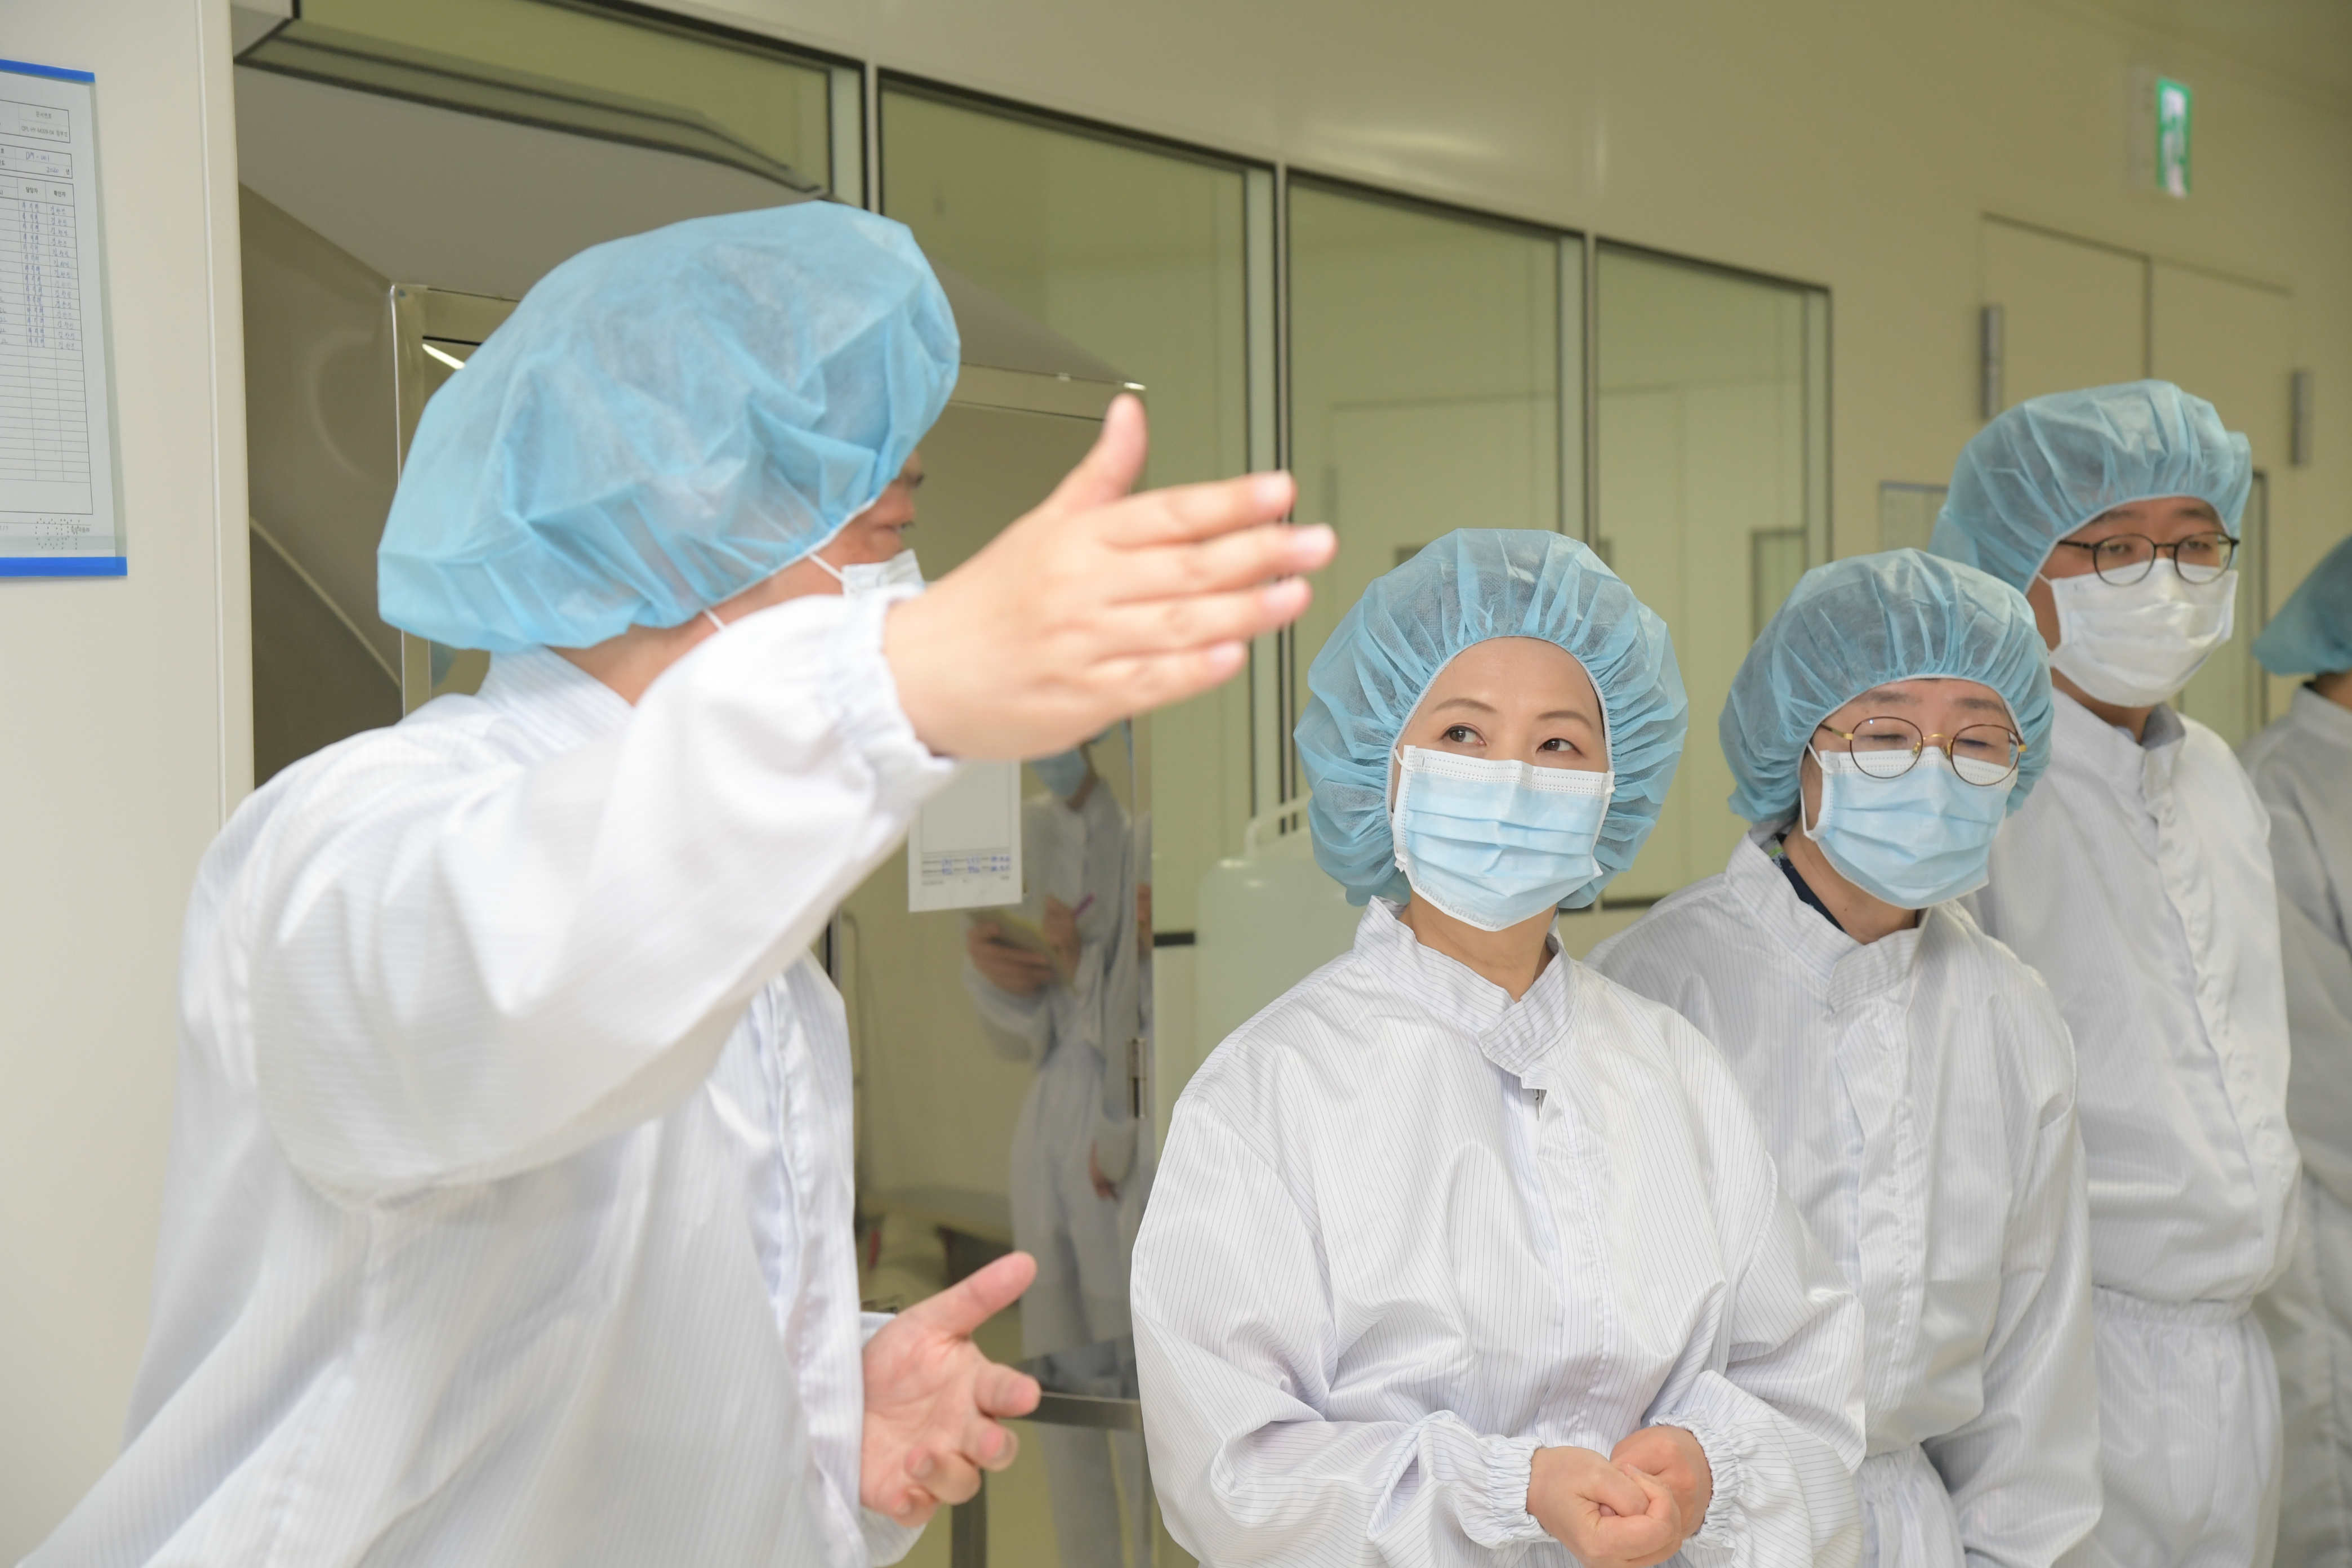 Photo News5 - [May 22, 2020] Minister inspects influenza vaccine manufacturing sites and attends pharmaceutical industry conference